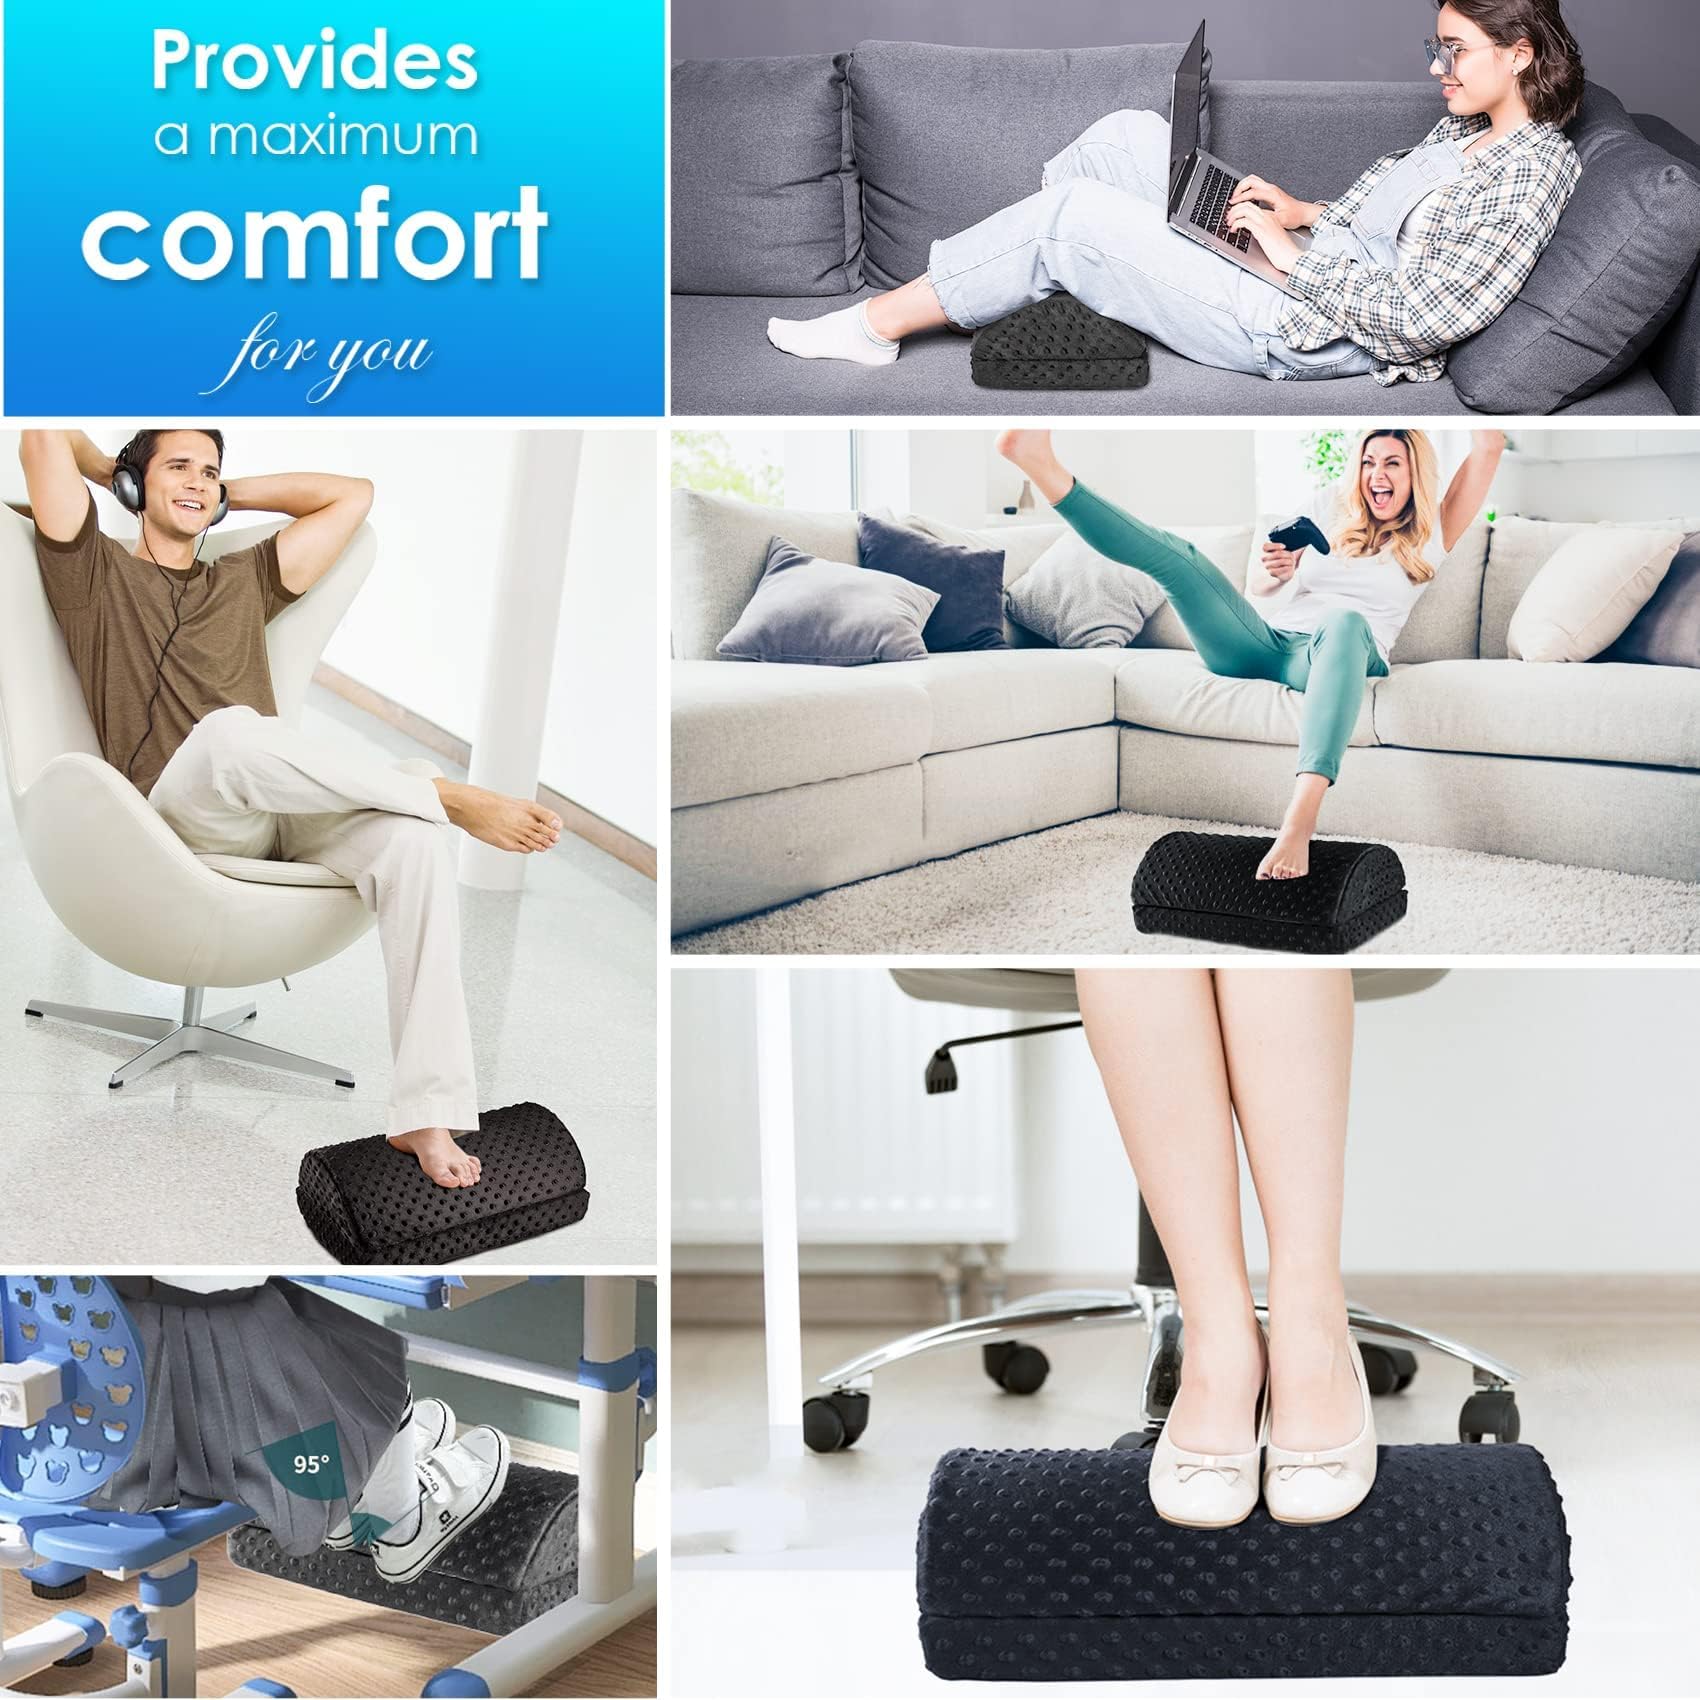 TYASOKI Foot Rest Under Desk - Desk Foot Rest with 2 Adjustable Heights - Ergonomic Footrest Under Desk for Office Chair & Gaming Chair - Foots Tool for Home Airplane Car to Relieve Back Knee Pain …